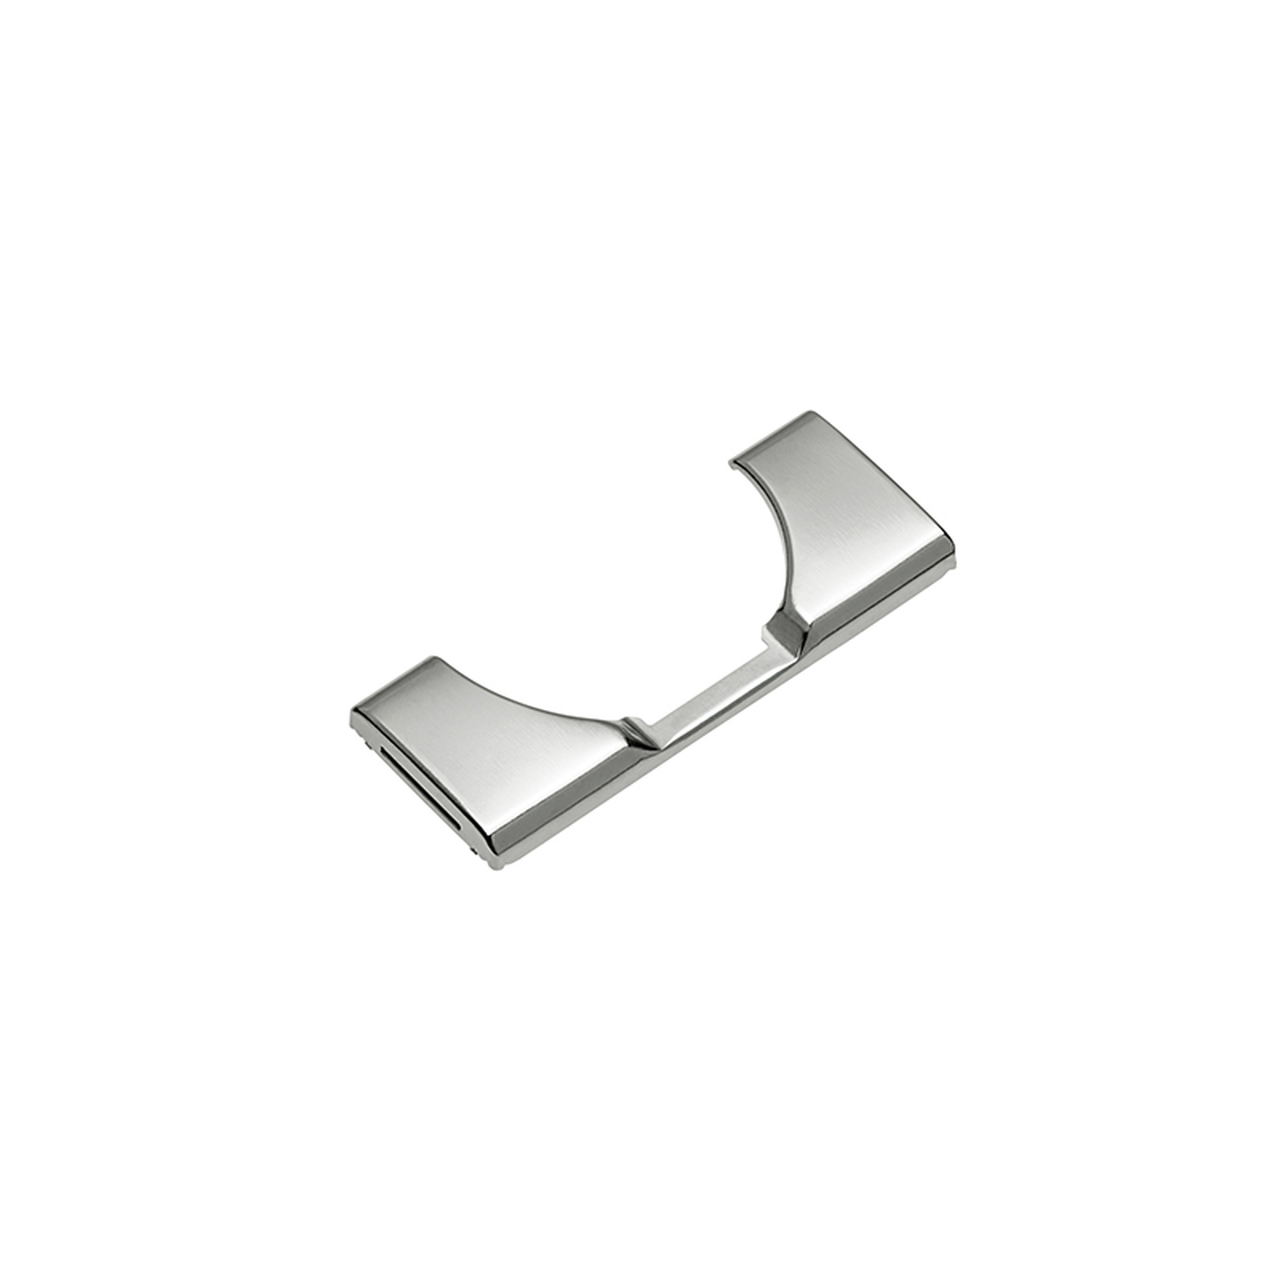 Clip Top Hinge Boss Cover Cap for use with 155° Hinge - Nickel Plate - Austrian